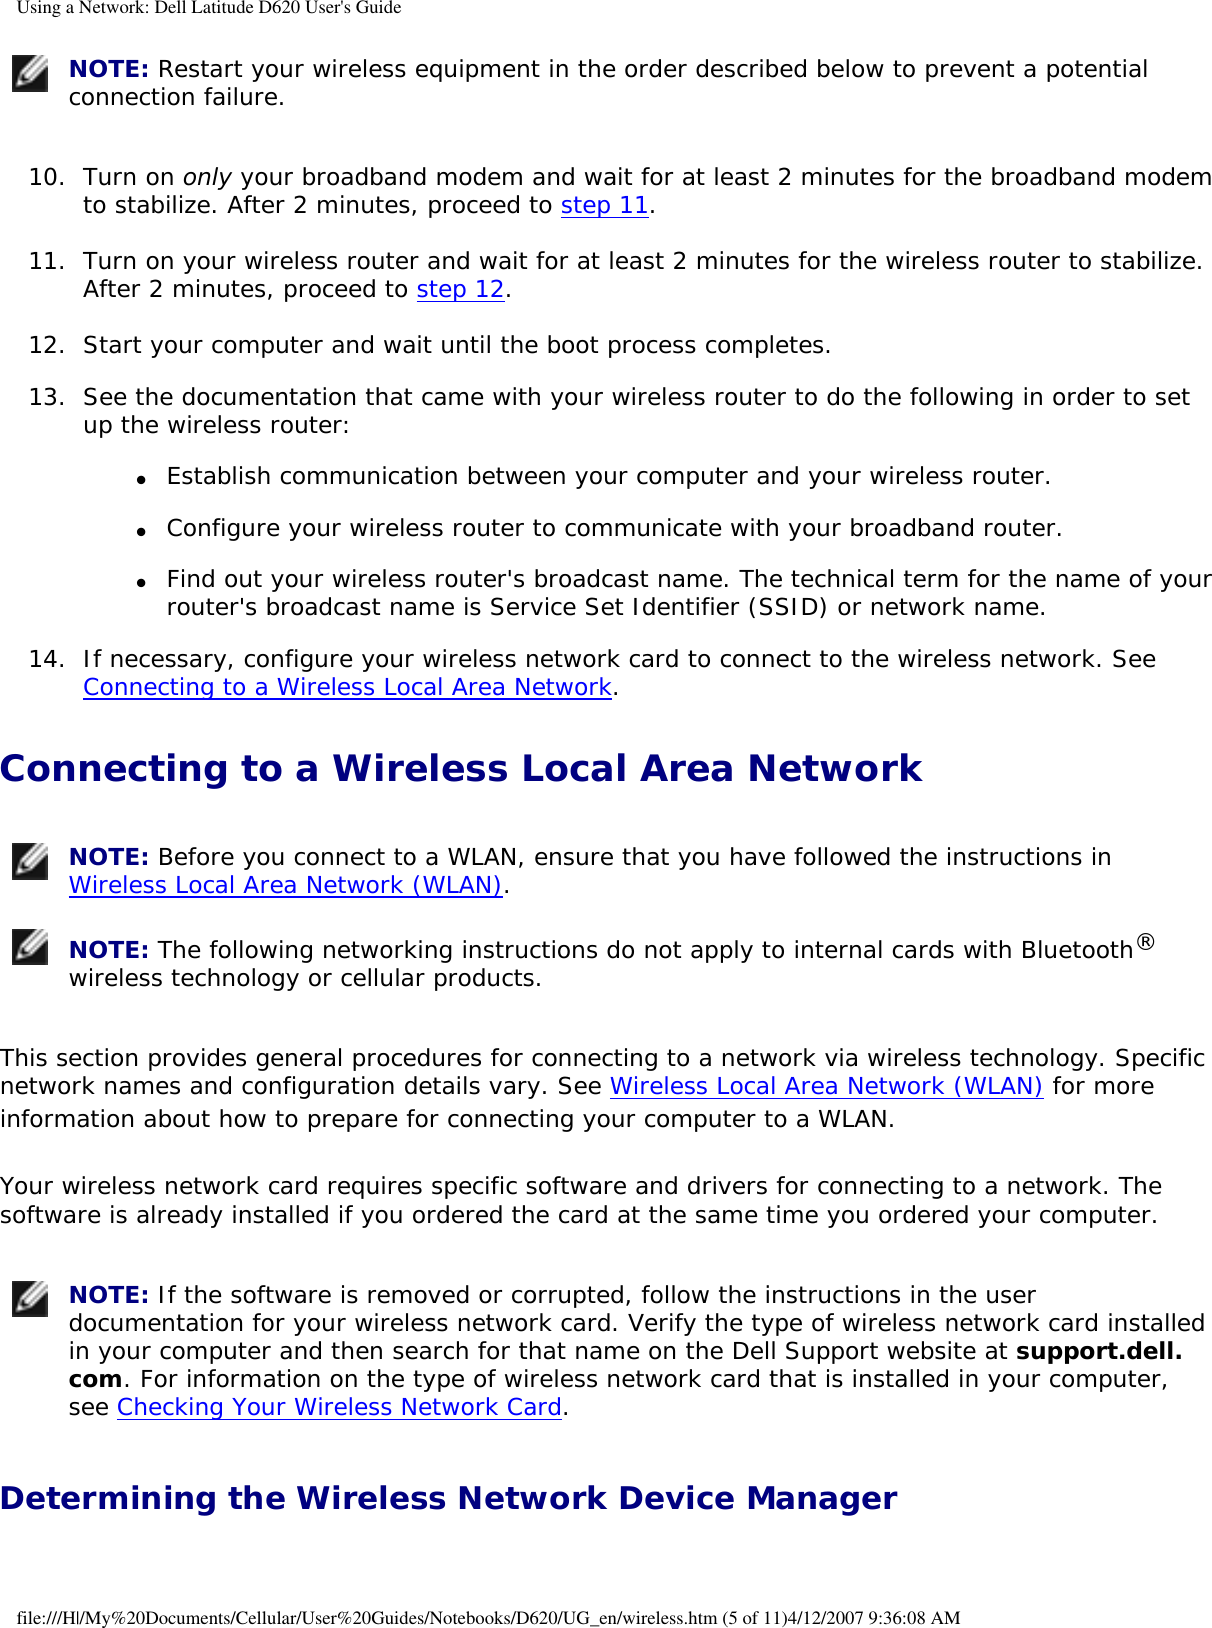 Using a Network: Dell Latitude D620 User&apos;s Guide NOTE: Restart your wireless equipment in the order described below to prevent a potential connection failure.10.  Turn on only your broadband modem and wait for at least 2 minutes for the broadband modem to stabilize. After 2 minutes, proceed to step 11.   11.  Turn on your wireless router and wait for at least 2 minutes for the wireless router to stabilize. After 2 minutes, proceed to step 12.   12.  Start your computer and wait until the boot process completes.   13.  See the documentation that came with your wireless router to do the following in order to set up the wireless router:   ●     Establish communication between your computer and your wireless router.  ●     Configure your wireless router to communicate with your broadband router.  ●     Find out your wireless router&apos;s broadcast name. The technical term for the name of your router&apos;s broadcast name is Service Set Identifier (SSID) or network name.  14.  If necessary, configure your wireless network card to connect to the wireless network. See Connecting to a Wireless Local Area Network.   Connecting to a Wireless Local Area Network NOTE: Before you connect to a WLAN, ensure that you have followed the instructions in Wireless Local Area Network (WLAN). NOTE: The following networking instructions do not apply to internal cards with Bluetooth® wireless technology or cellular products.This section provides general procedures for connecting to a network via wireless technology. Specific network names and configuration details vary. See Wireless Local Area Network (WLAN) for more information about how to prepare for connecting your computer to a WLAN. Your wireless network card requires specific software and drivers for connecting to a network. The software is already installed if you ordered the card at the same time you ordered your computer.  NOTE: If the software is removed or corrupted, follow the instructions in the user documentation for your wireless network card. Verify the type of wireless network card installed in your computer and then search for that name on the Dell Support website at support.dell.com. For information on the type of wireless network card that is installed in your computer, see Checking Your Wireless Network Card.Determining the Wireless Network Device Manager file:///H|/My%20Documents/Cellular/User%20Guides/Notebooks/D620/UG_en/wireless.htm (5 of 11)4/12/2007 9:36:08 AM